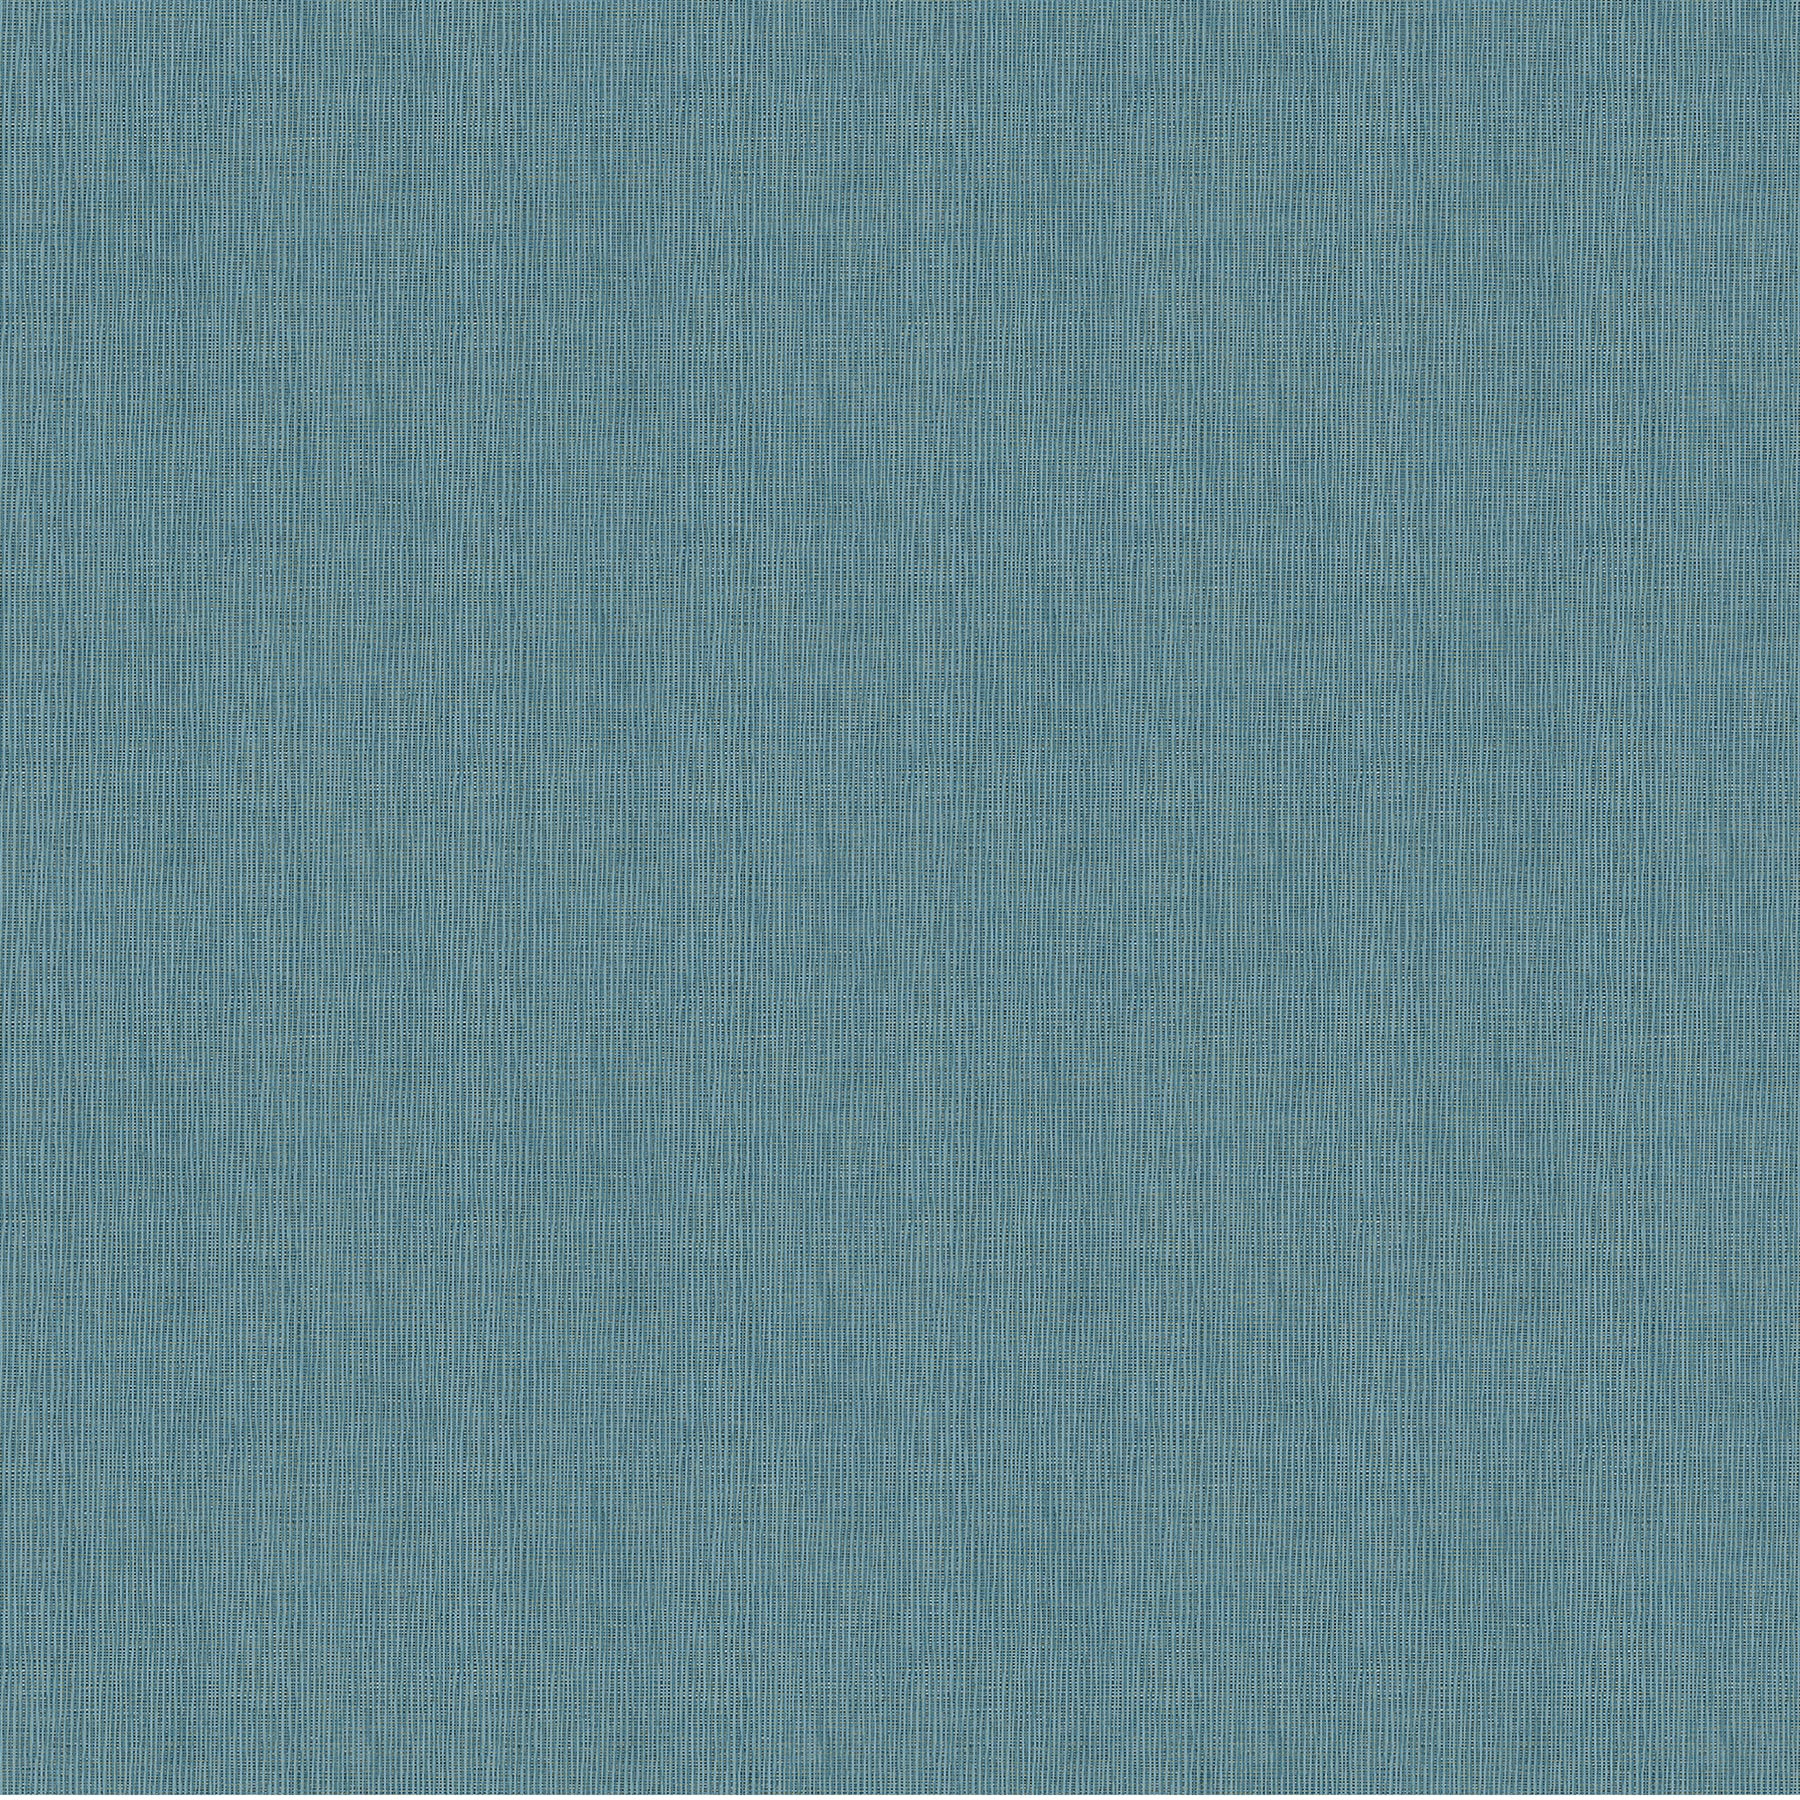 Select 4015-36976-3 Beyond Textures Seaton Teal Linen Texture Teal by Advantage